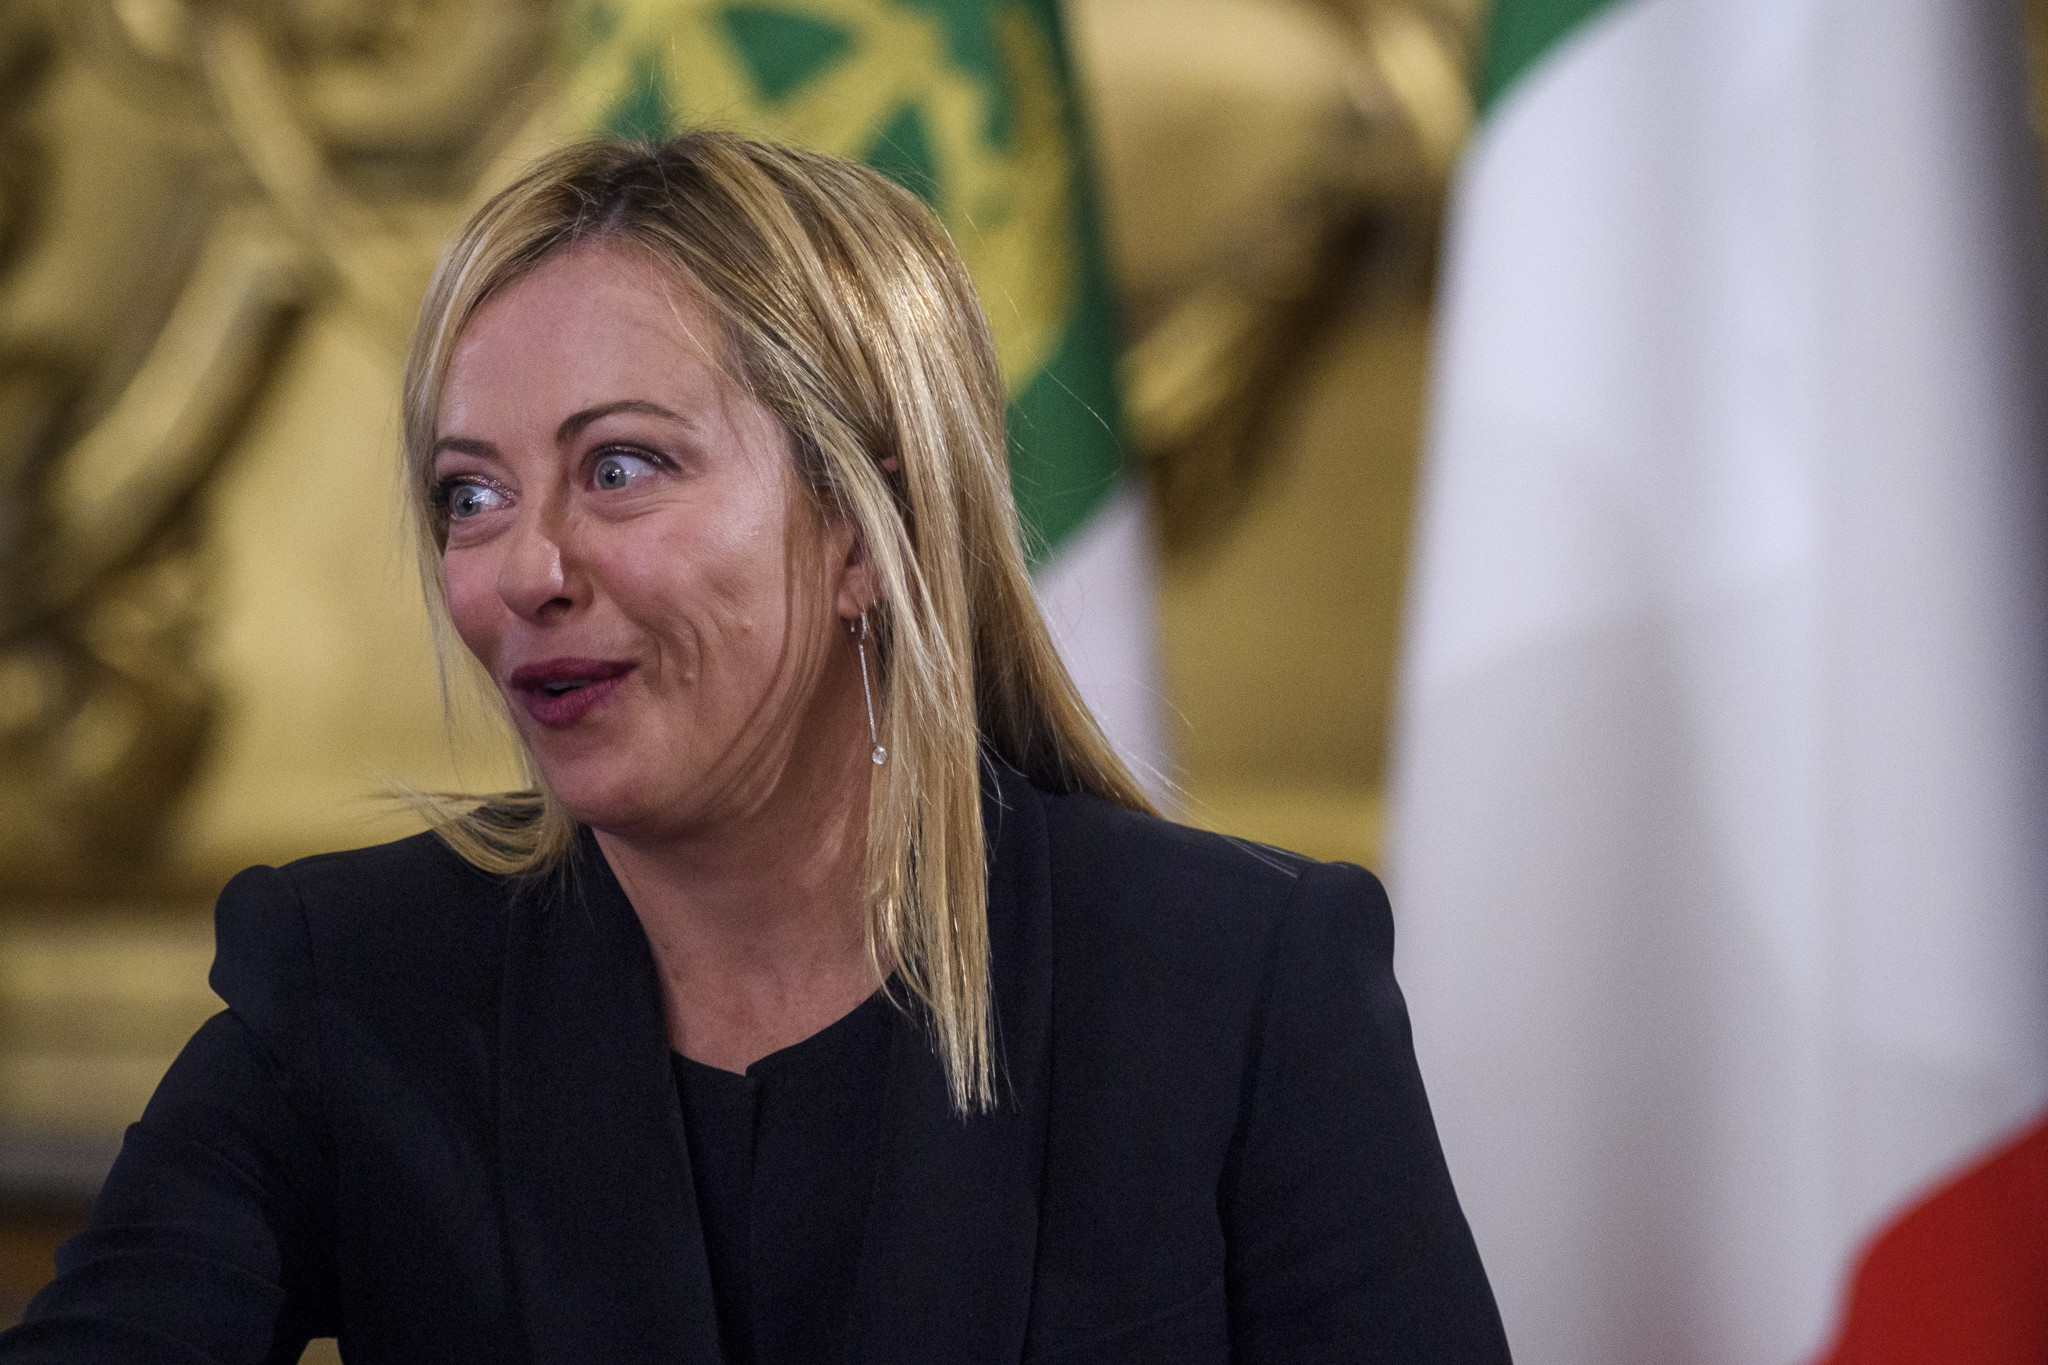 New far-right Italian Prime Minister Giorgia Meloni is set to play a key role in the build-up to Milan Cortina 2026, including appointing a new chief executive ©Getty Images